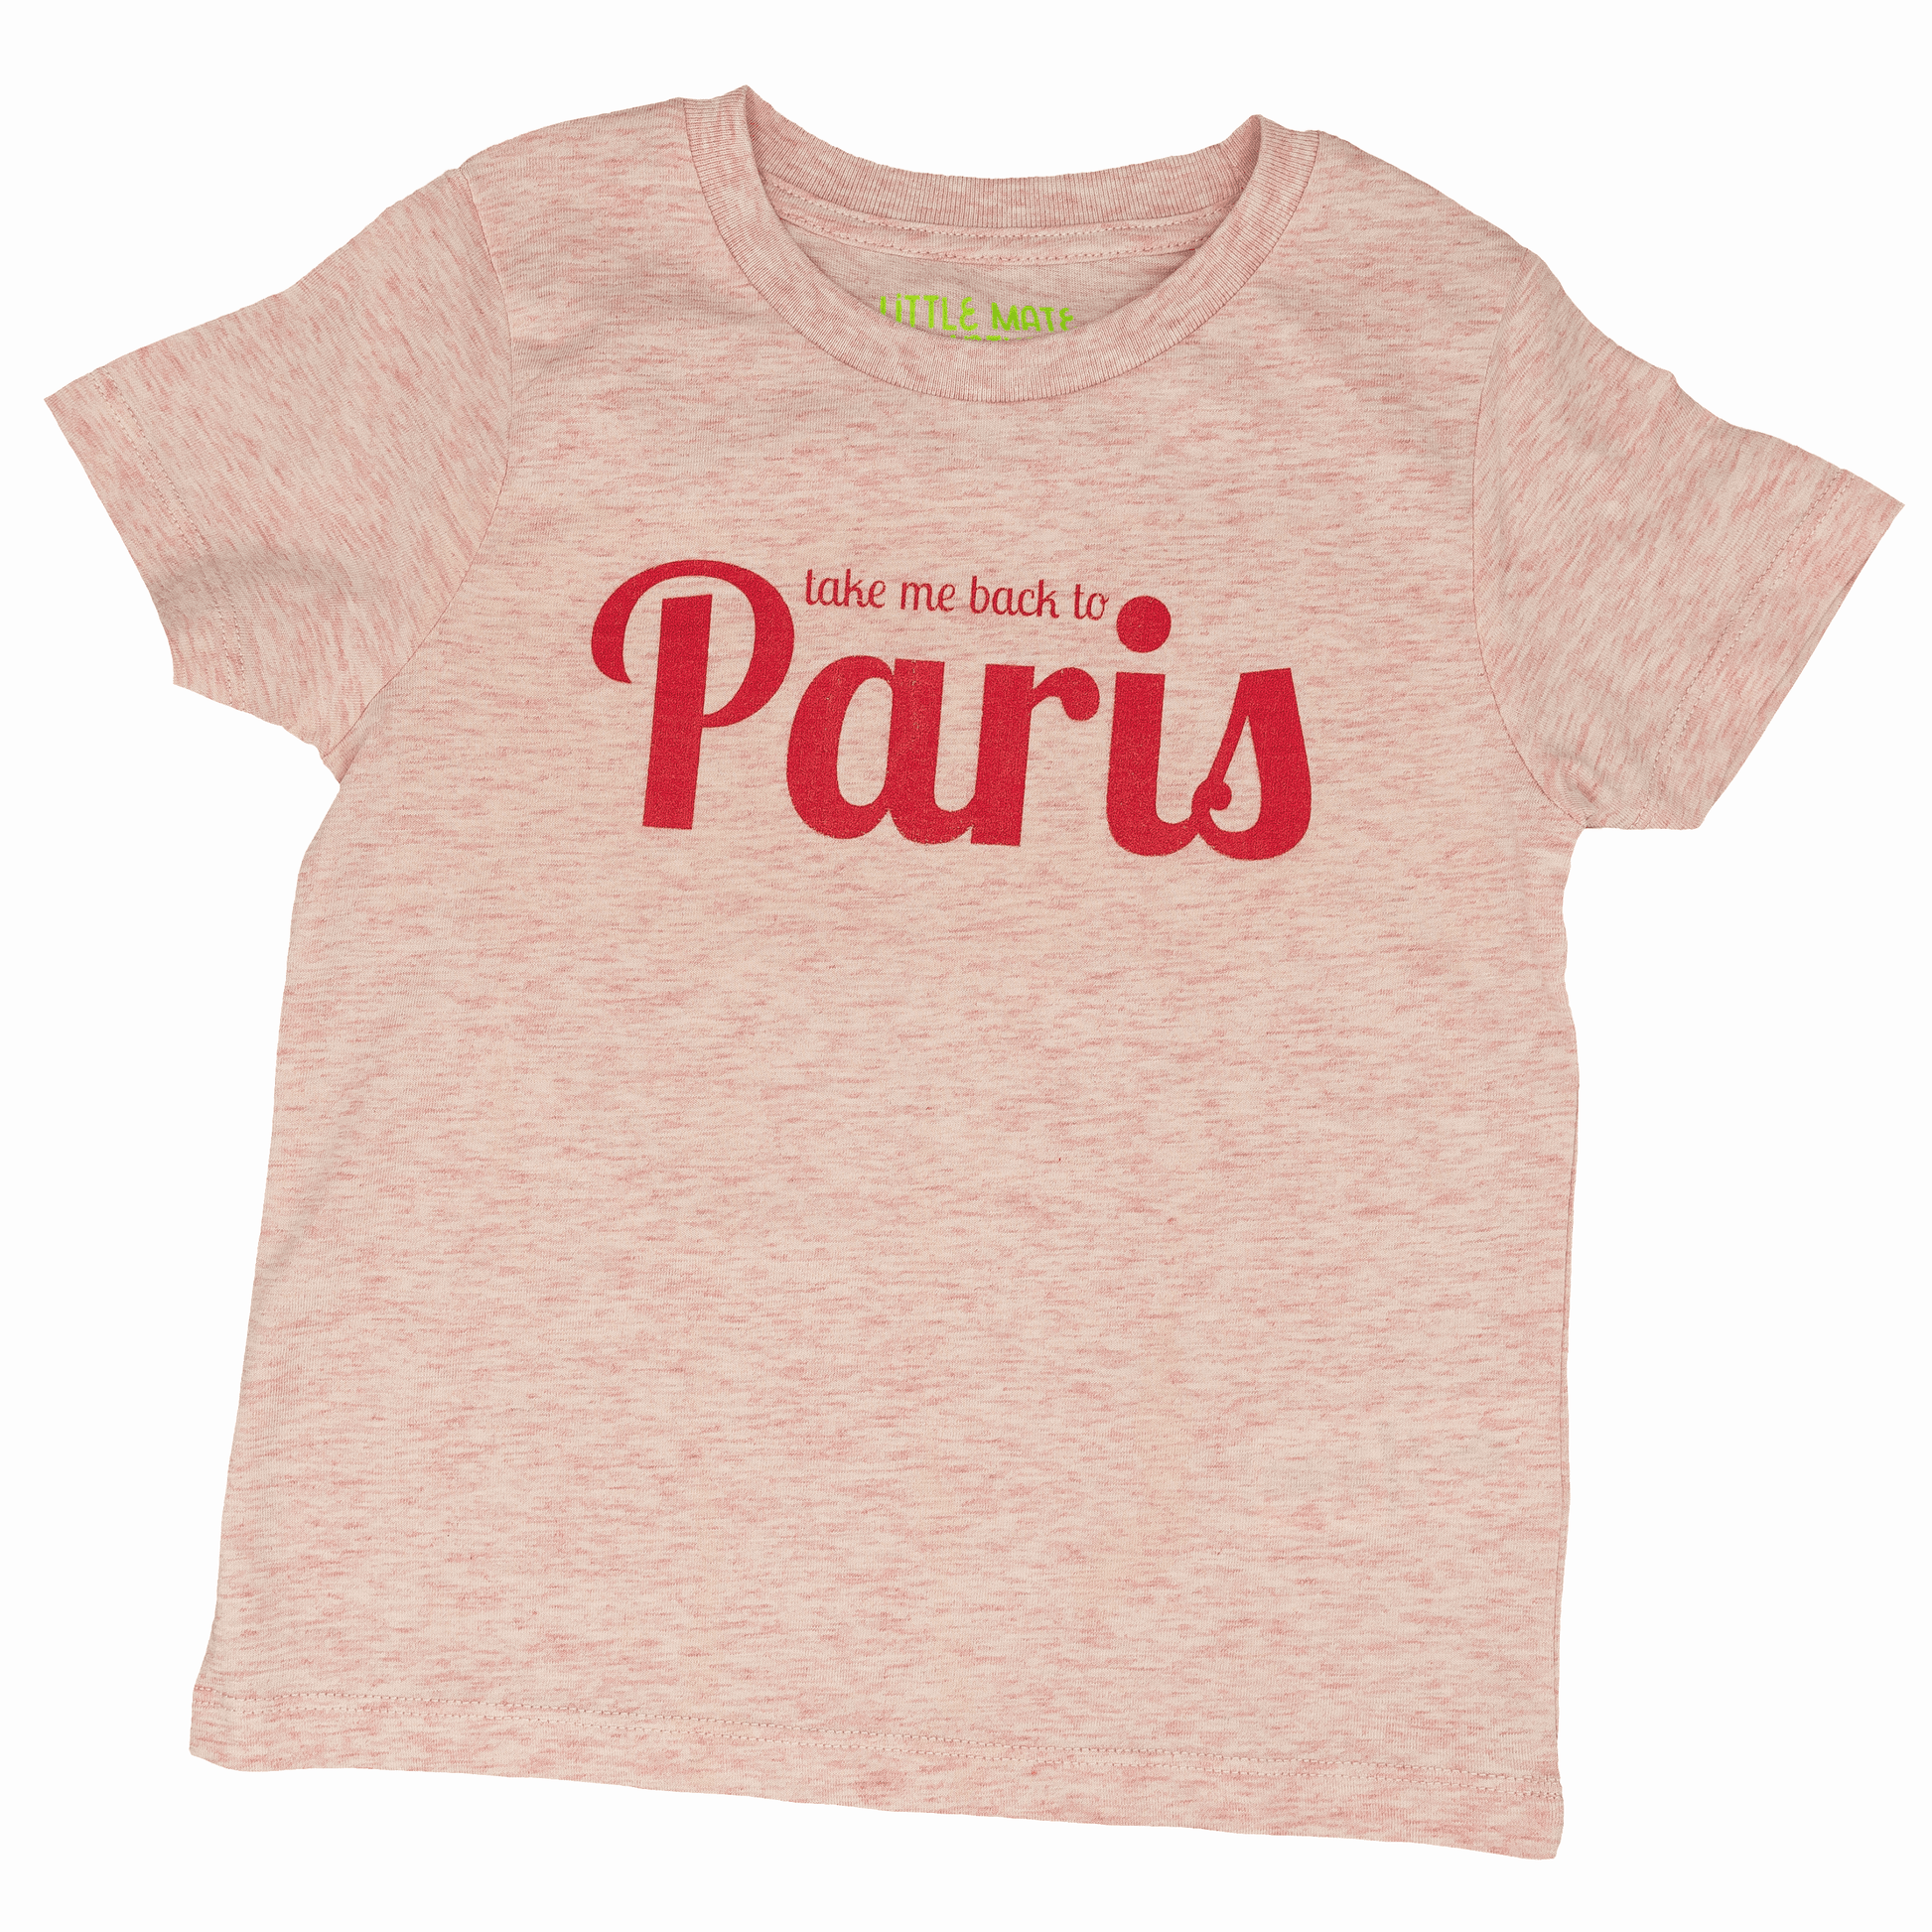 TAKE ME BACK TO PARIS - Toddler and Youth T-Shirt - Little Mate Adventures